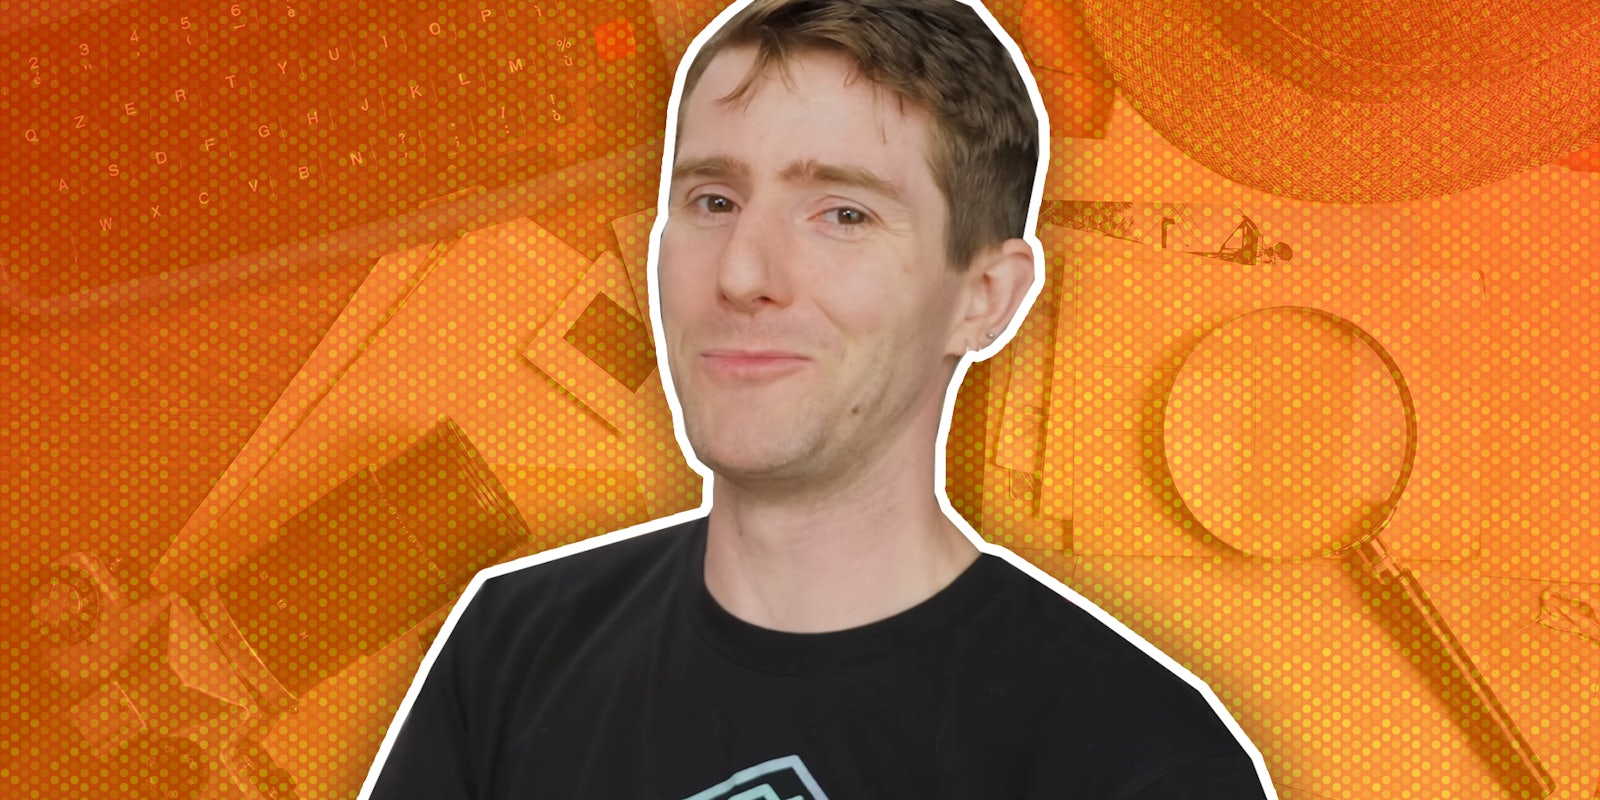 Linus Tech Tips says it investigated itself and found they did nothing wrong